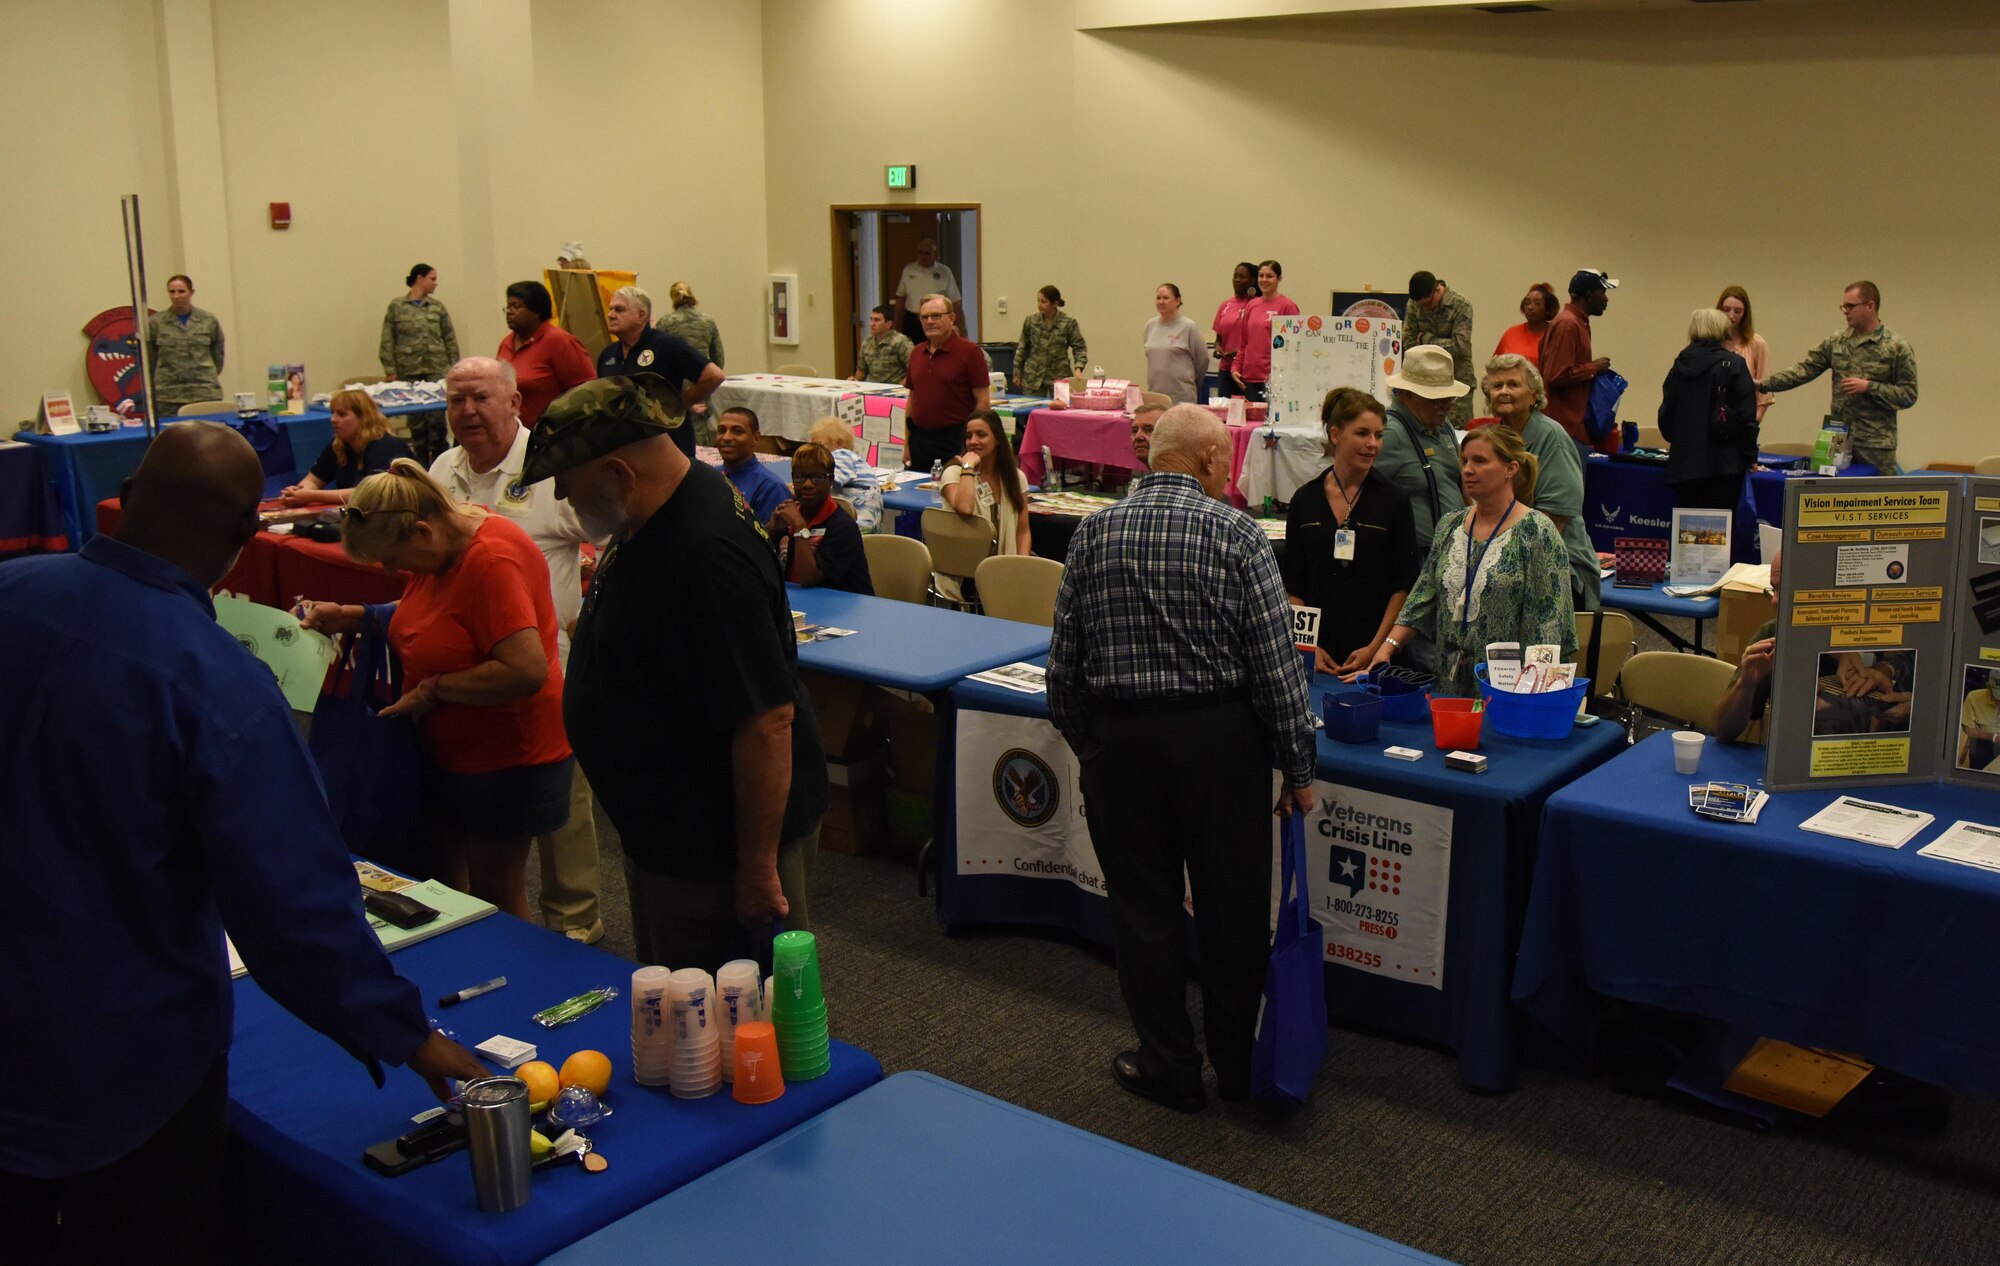 Military retirees attend Retiree Appreciation Day at the Roberts Consolidated Aircraft Maintenance Facility Nov. 4, 2016, on Keesler Air Force Base, Miss. The annual event, sponsored by the Keesler Retiree Activities Office, included more than 20 displays with information pertinent to retirees and a free lunch. (U.S. Air Force photo by Kemberly Groue/Released)